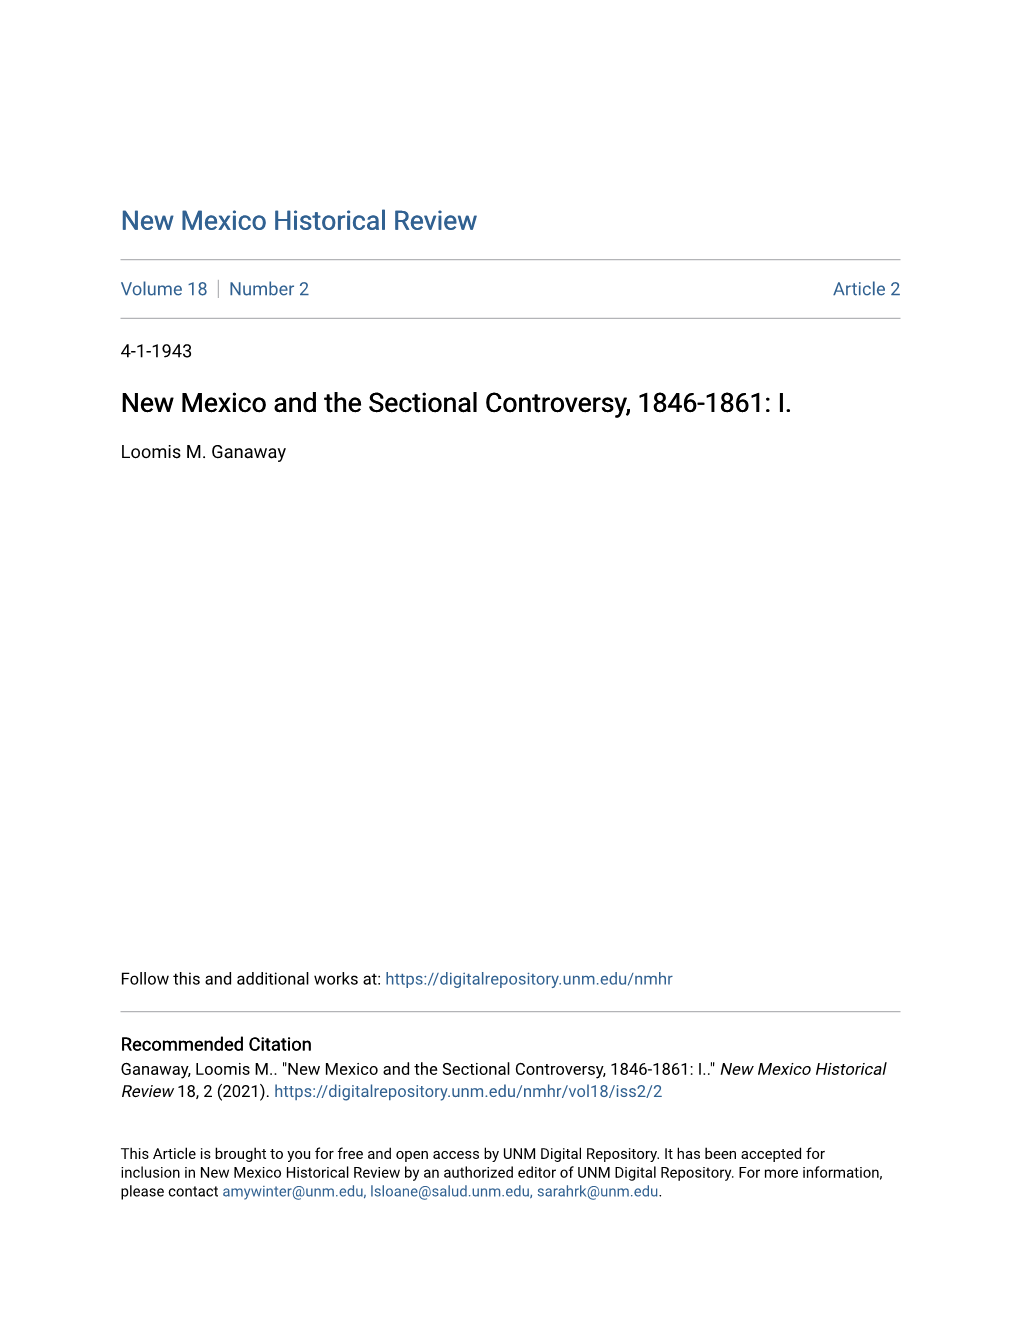 New Mexico and the Sectional Controversy, 1846-1861: I